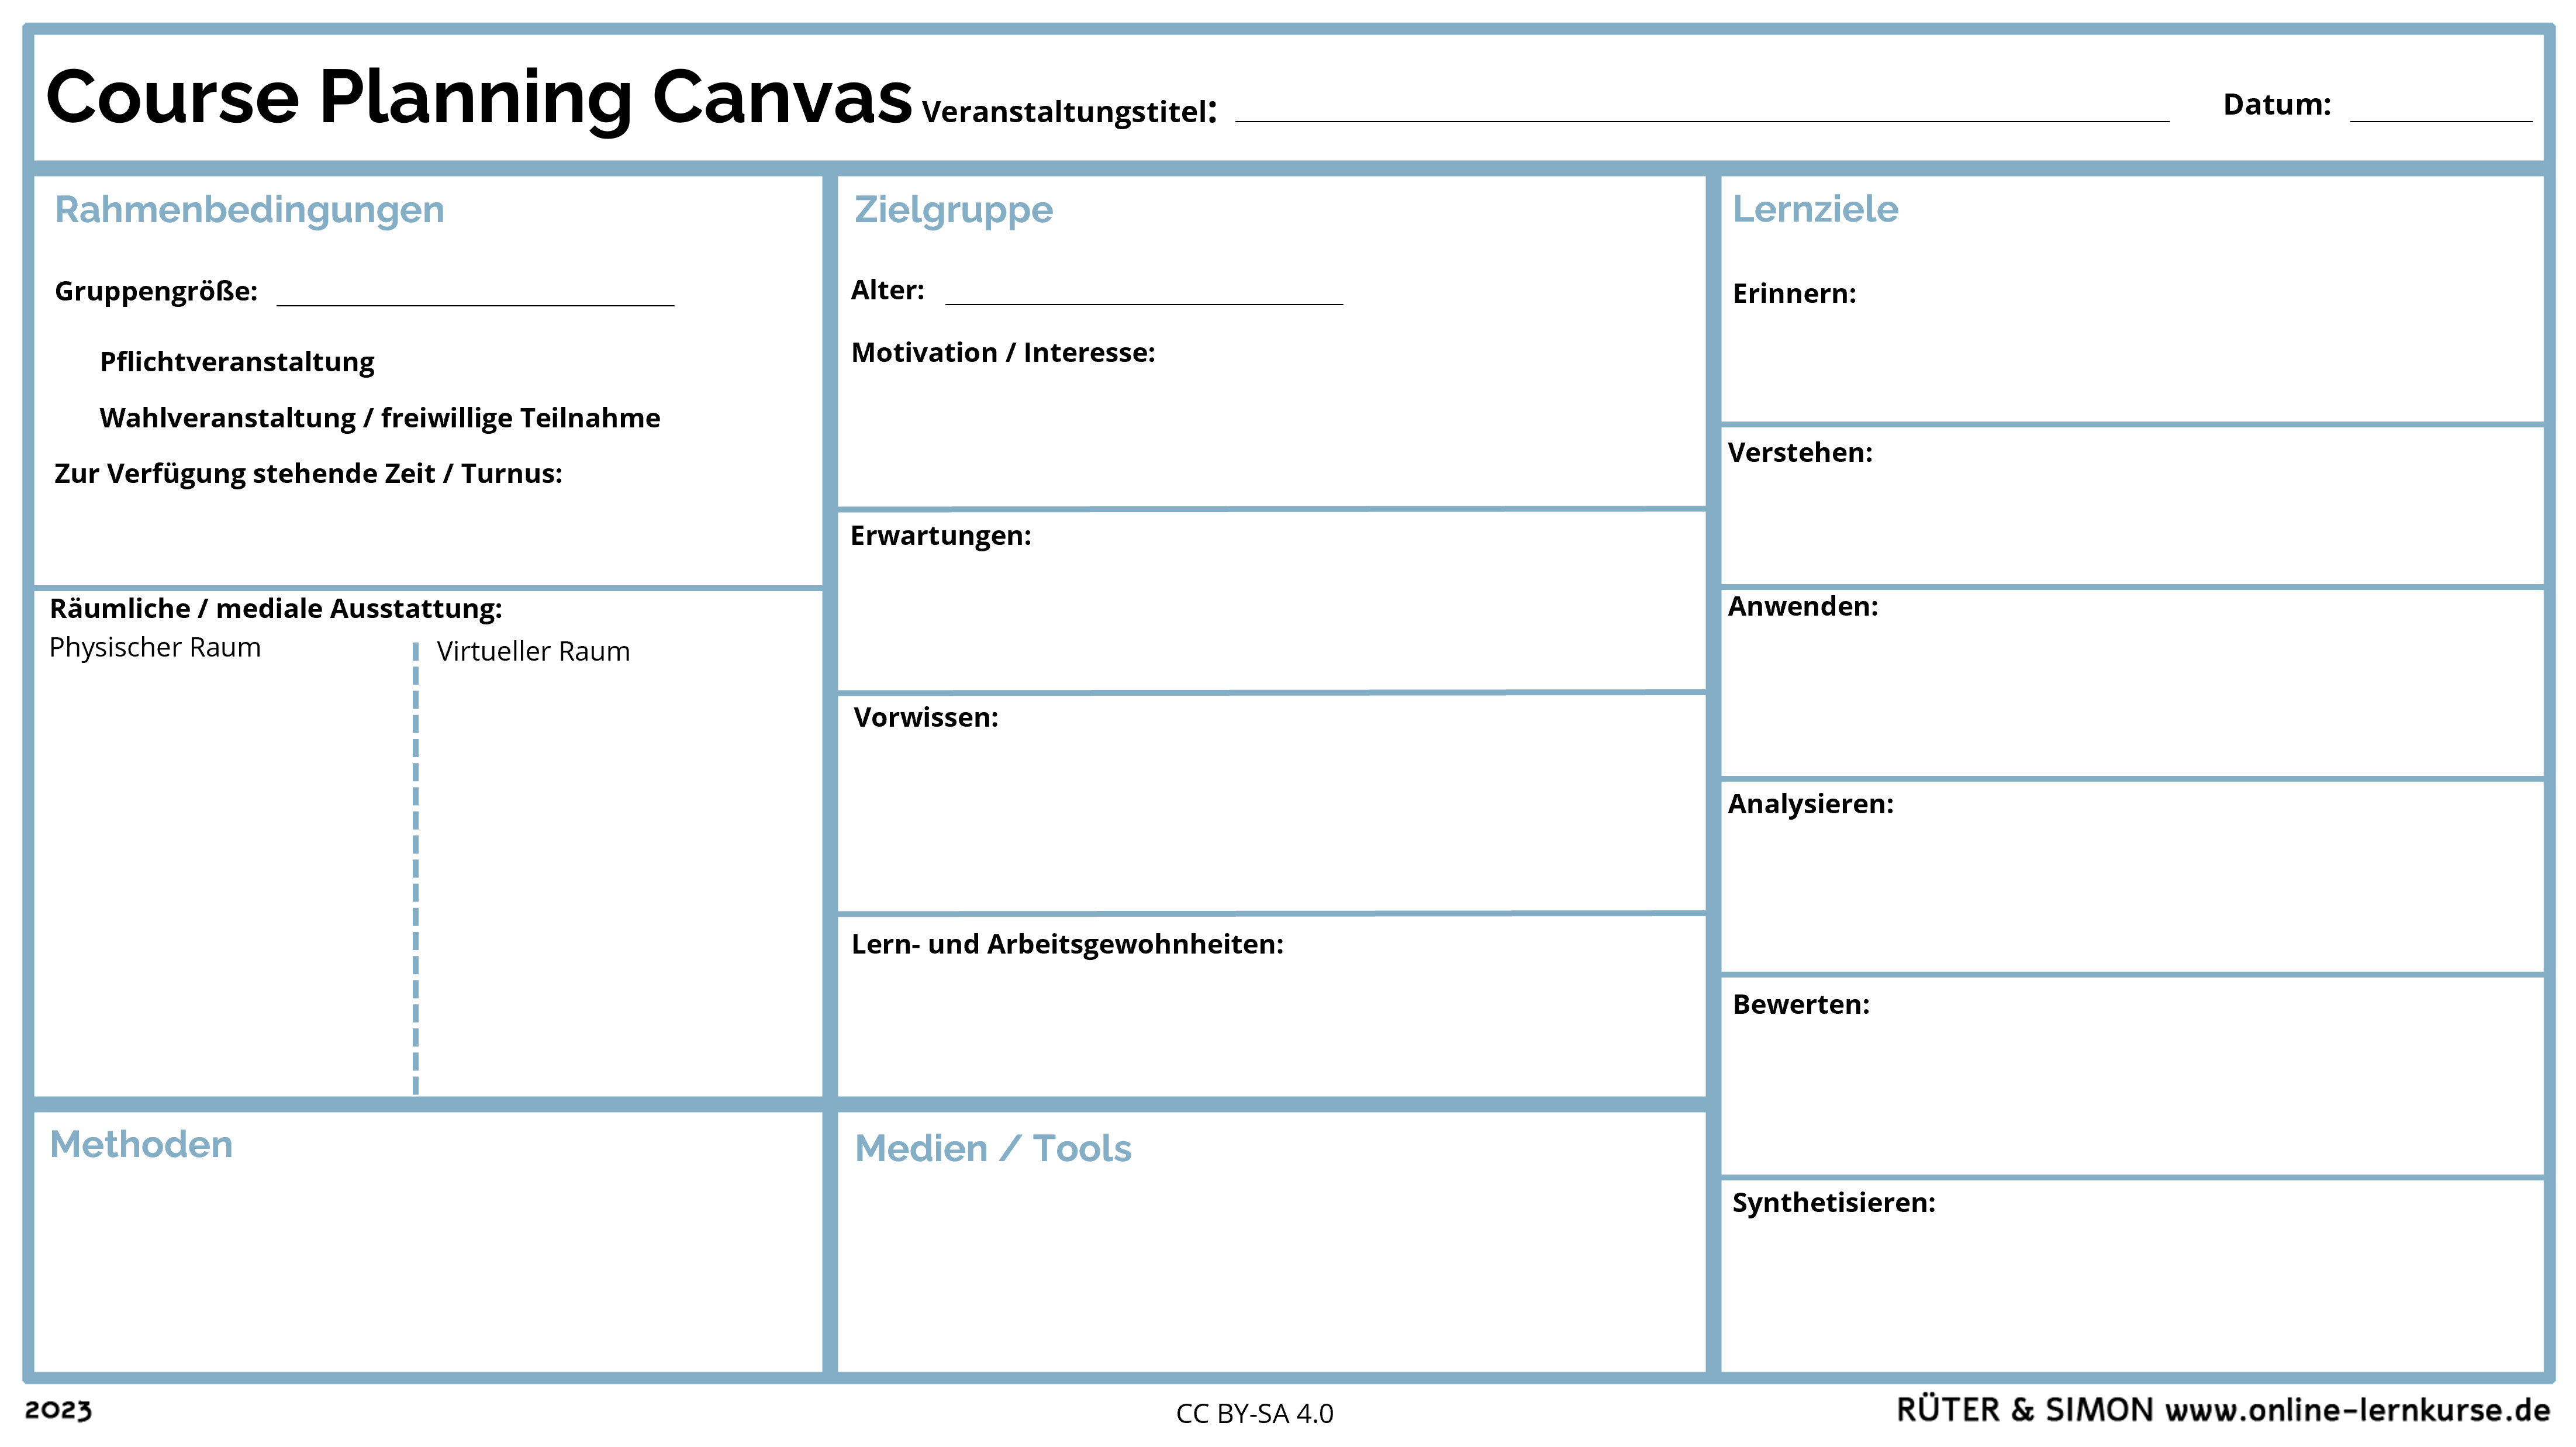 Course Planning Canvas